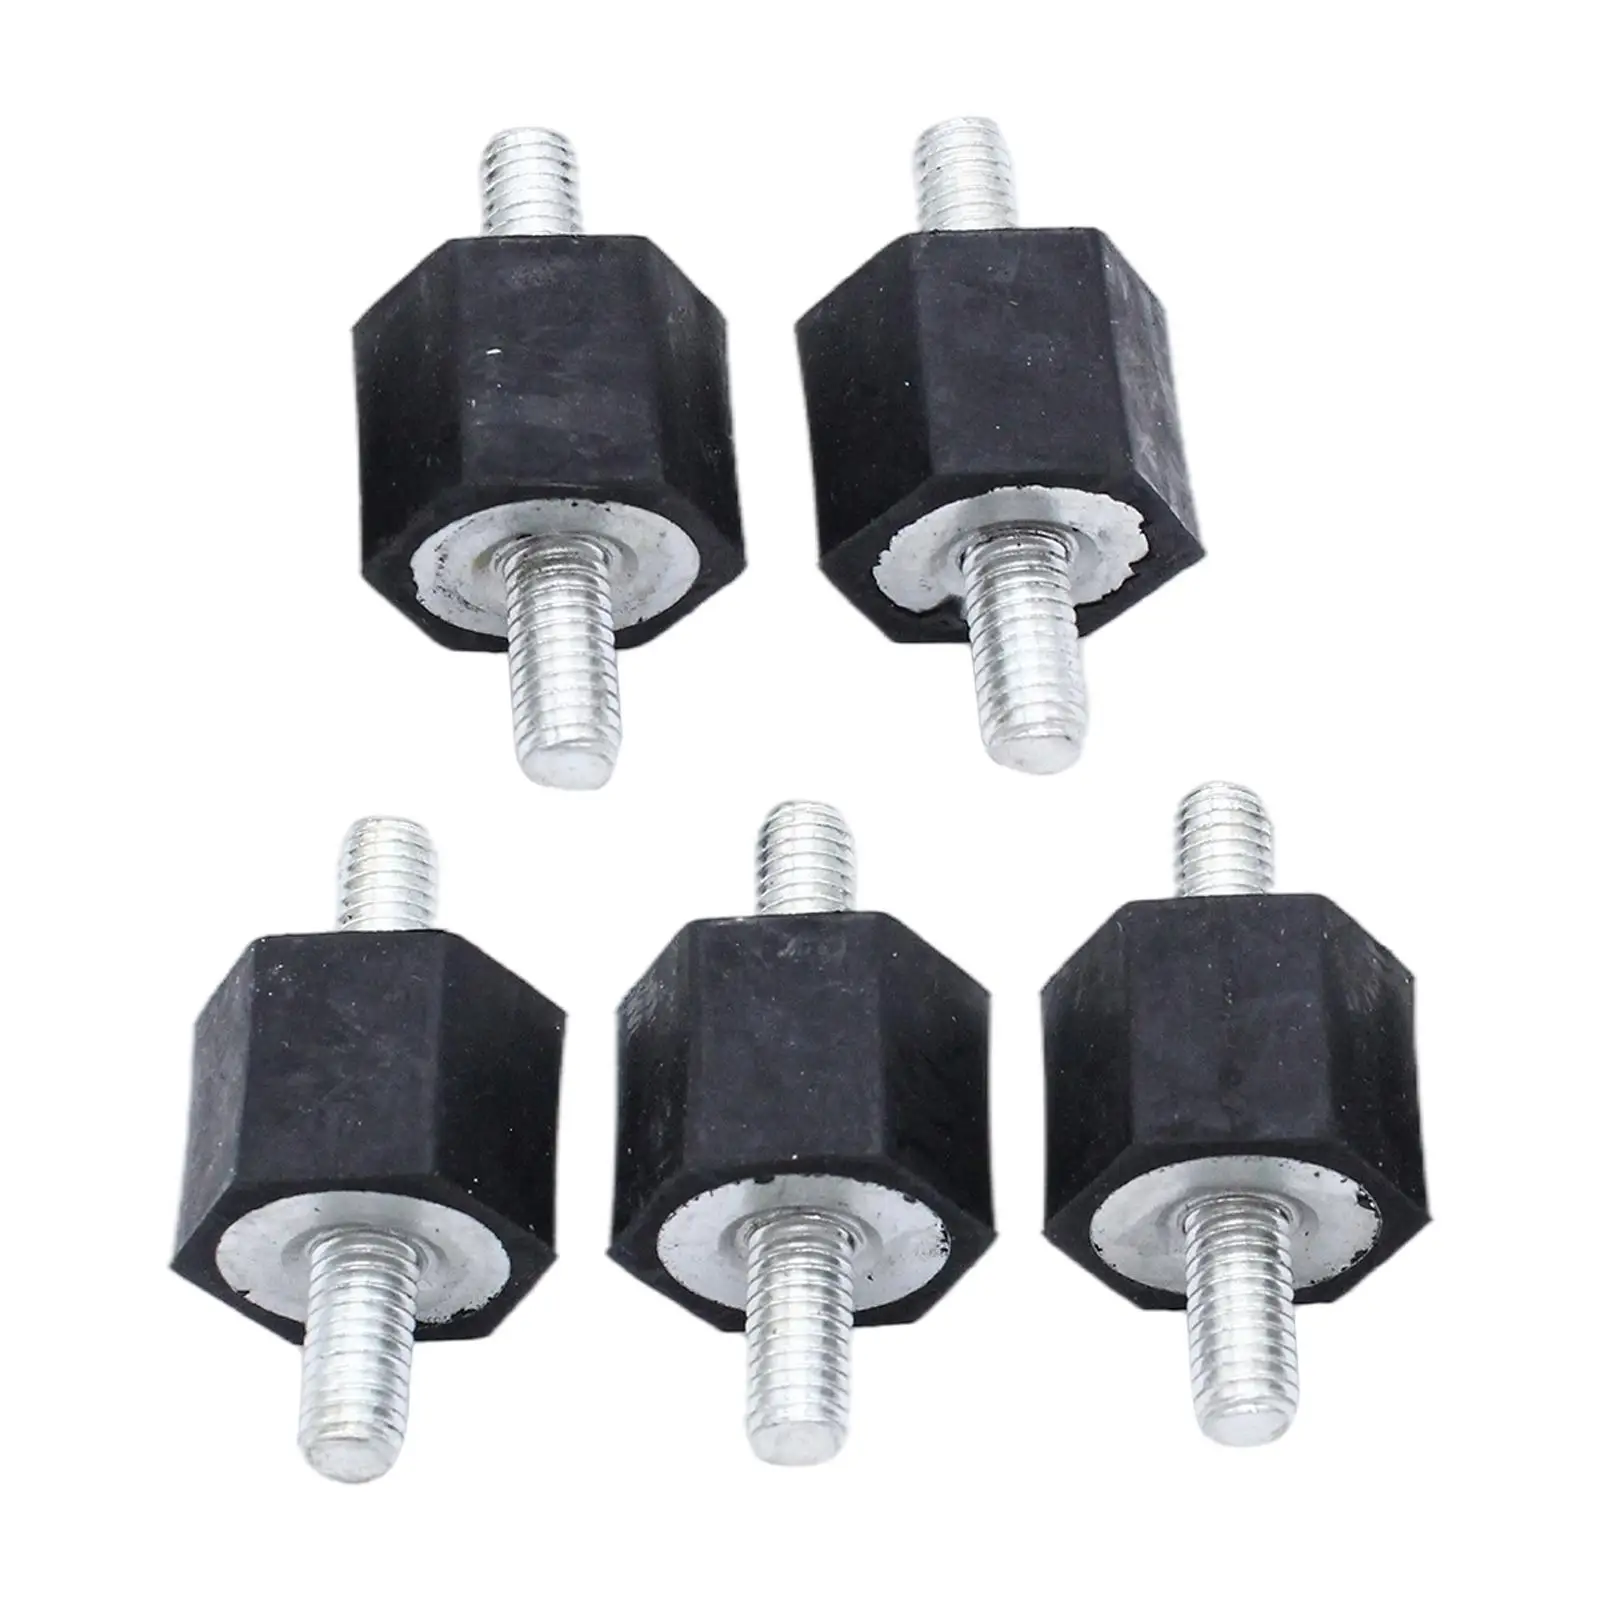 5 Pieces Fuel Pump Engine Cover Rubber Mounts Fit for Golf MK2 Oil Coolers